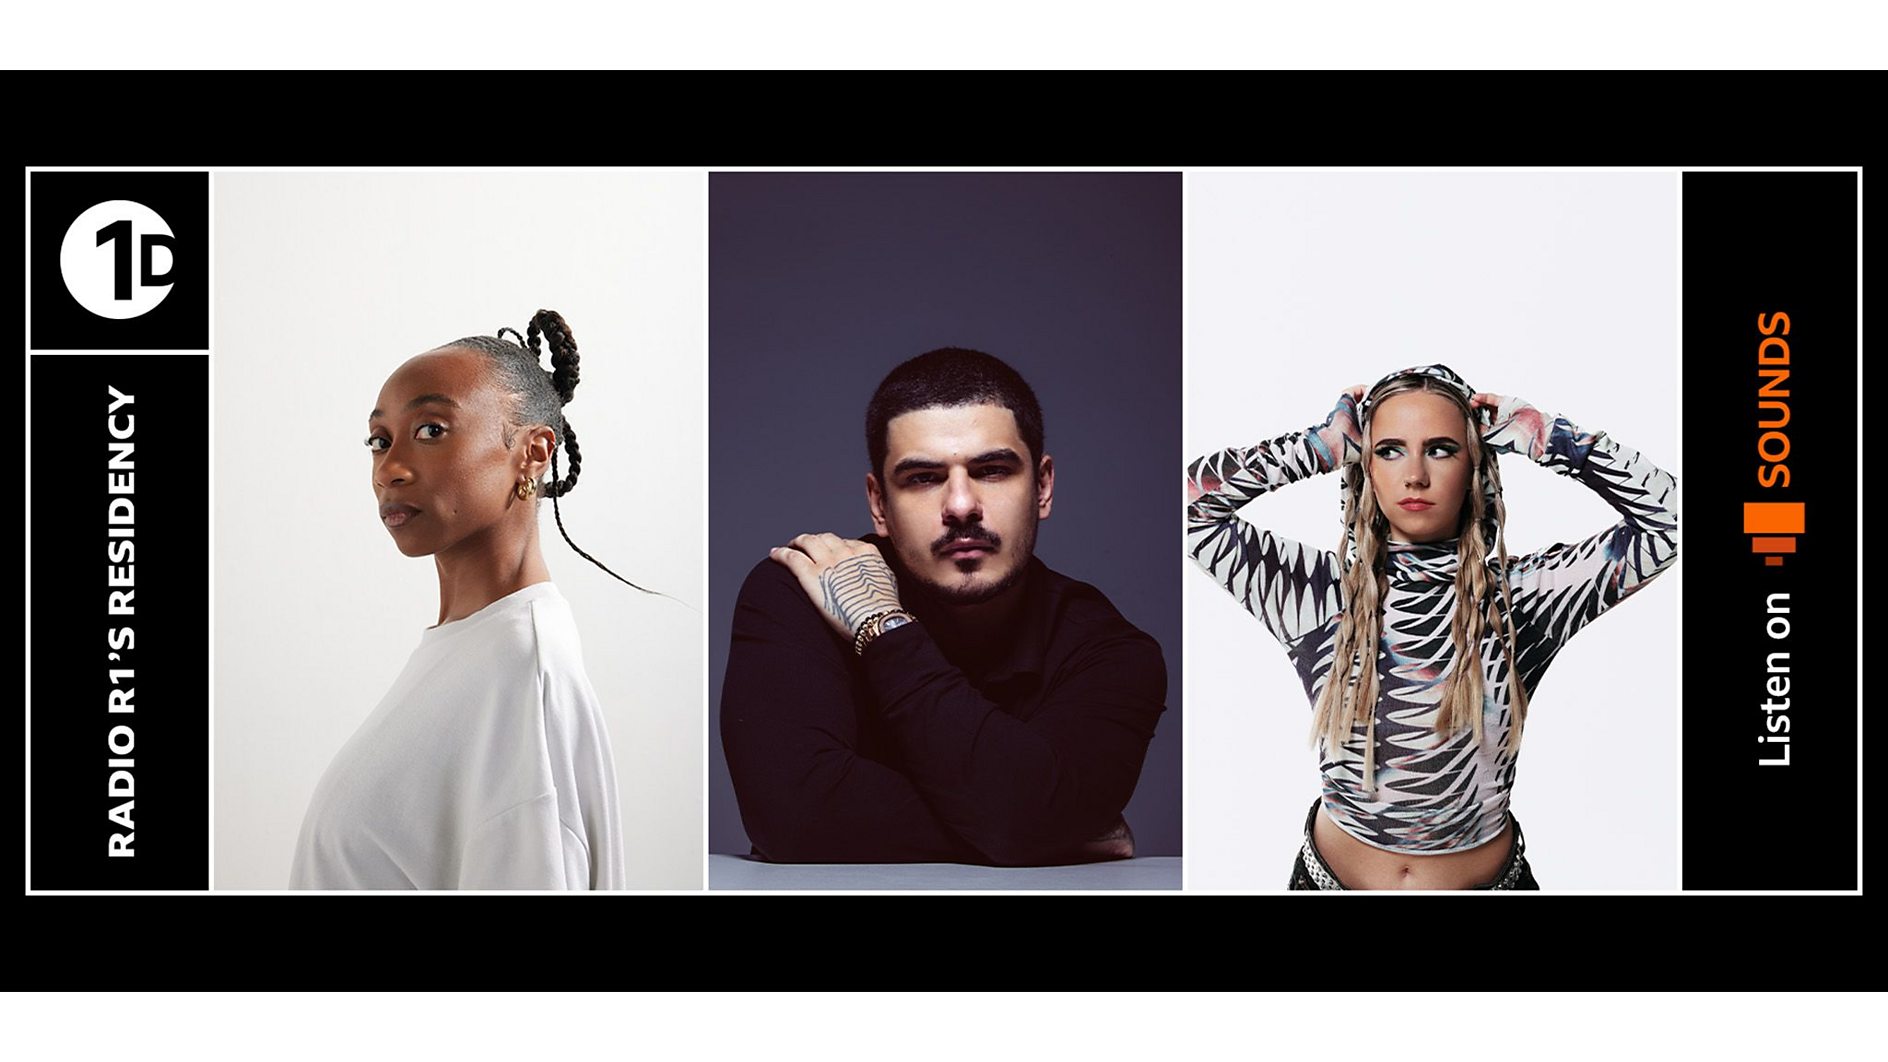 Vintage Culture, NIKS and A Little Sound to join BBC Radio 1’s Residency